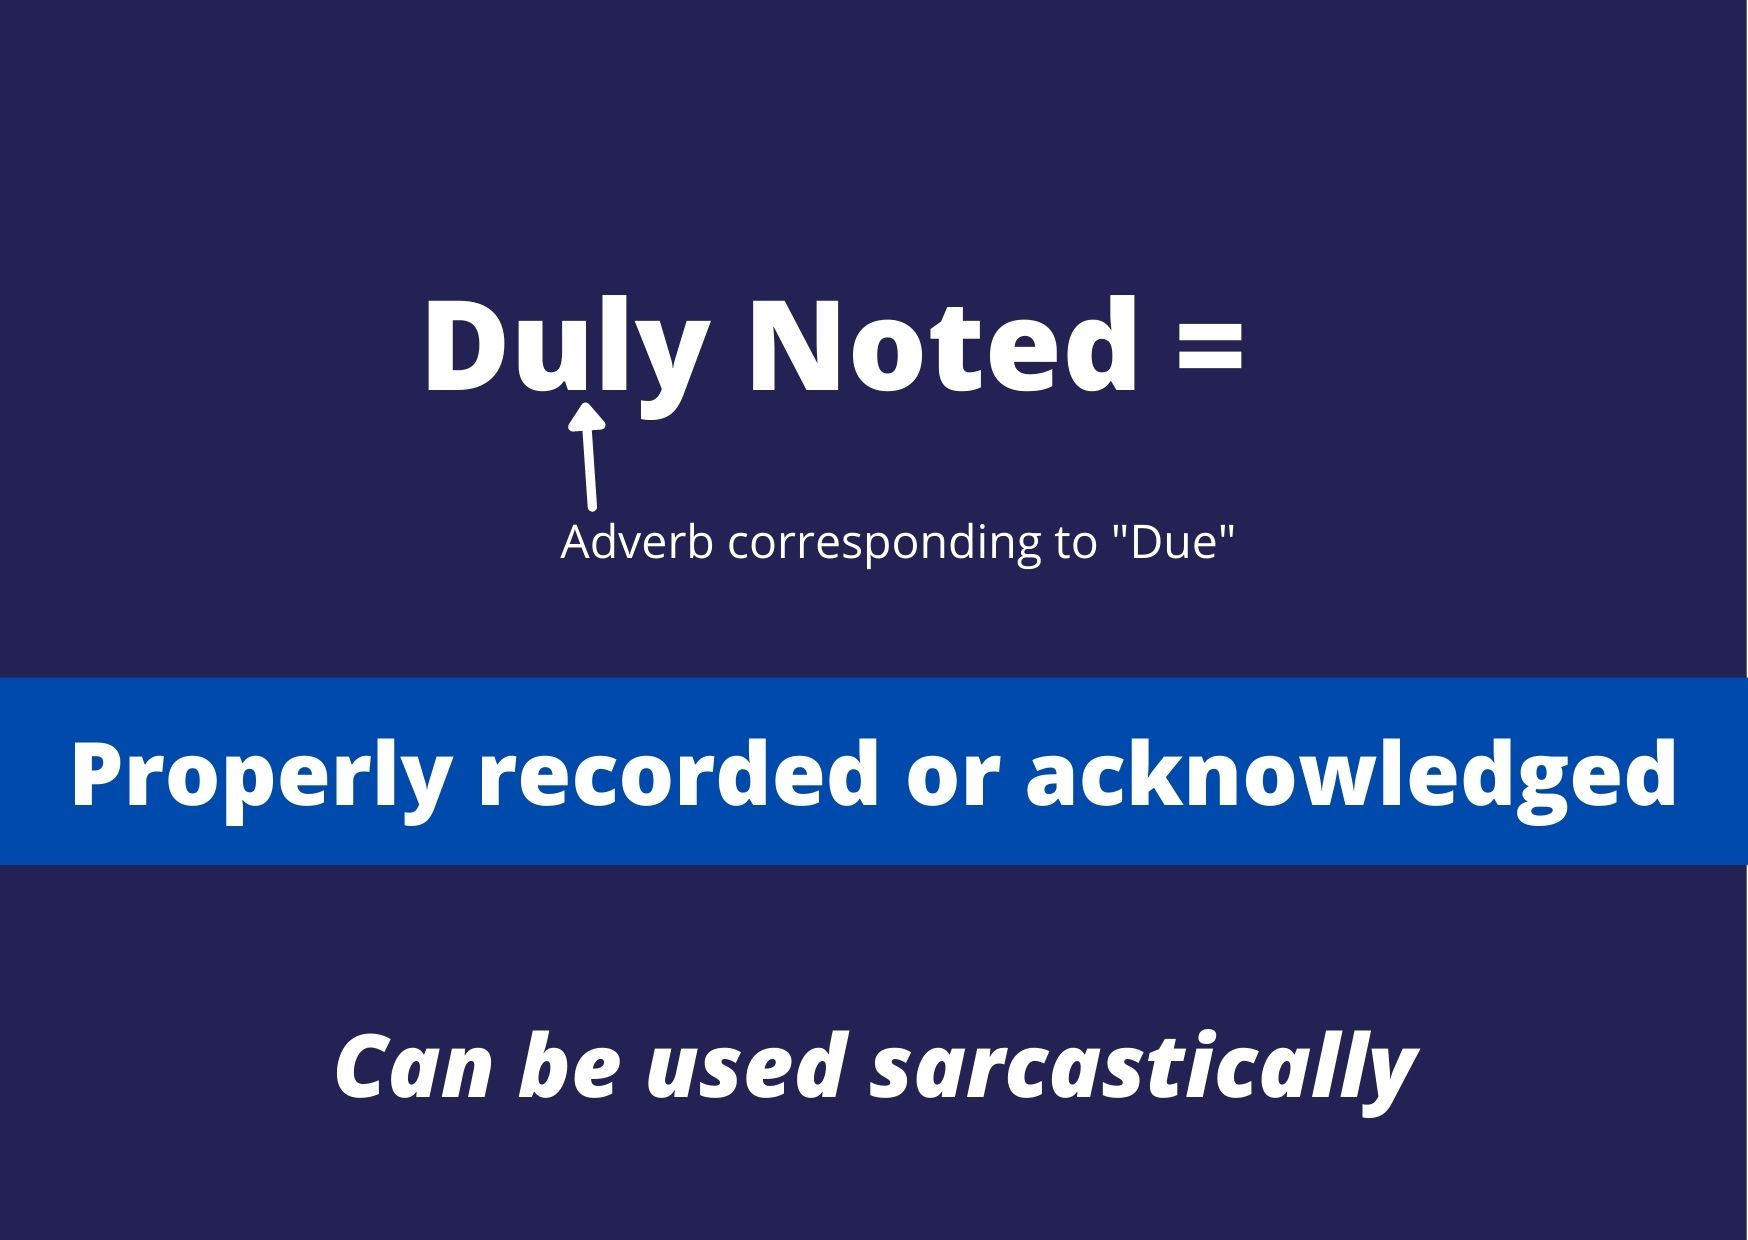 Duly Noted: properly recorded or acknowledged" (can be used sarcastically)